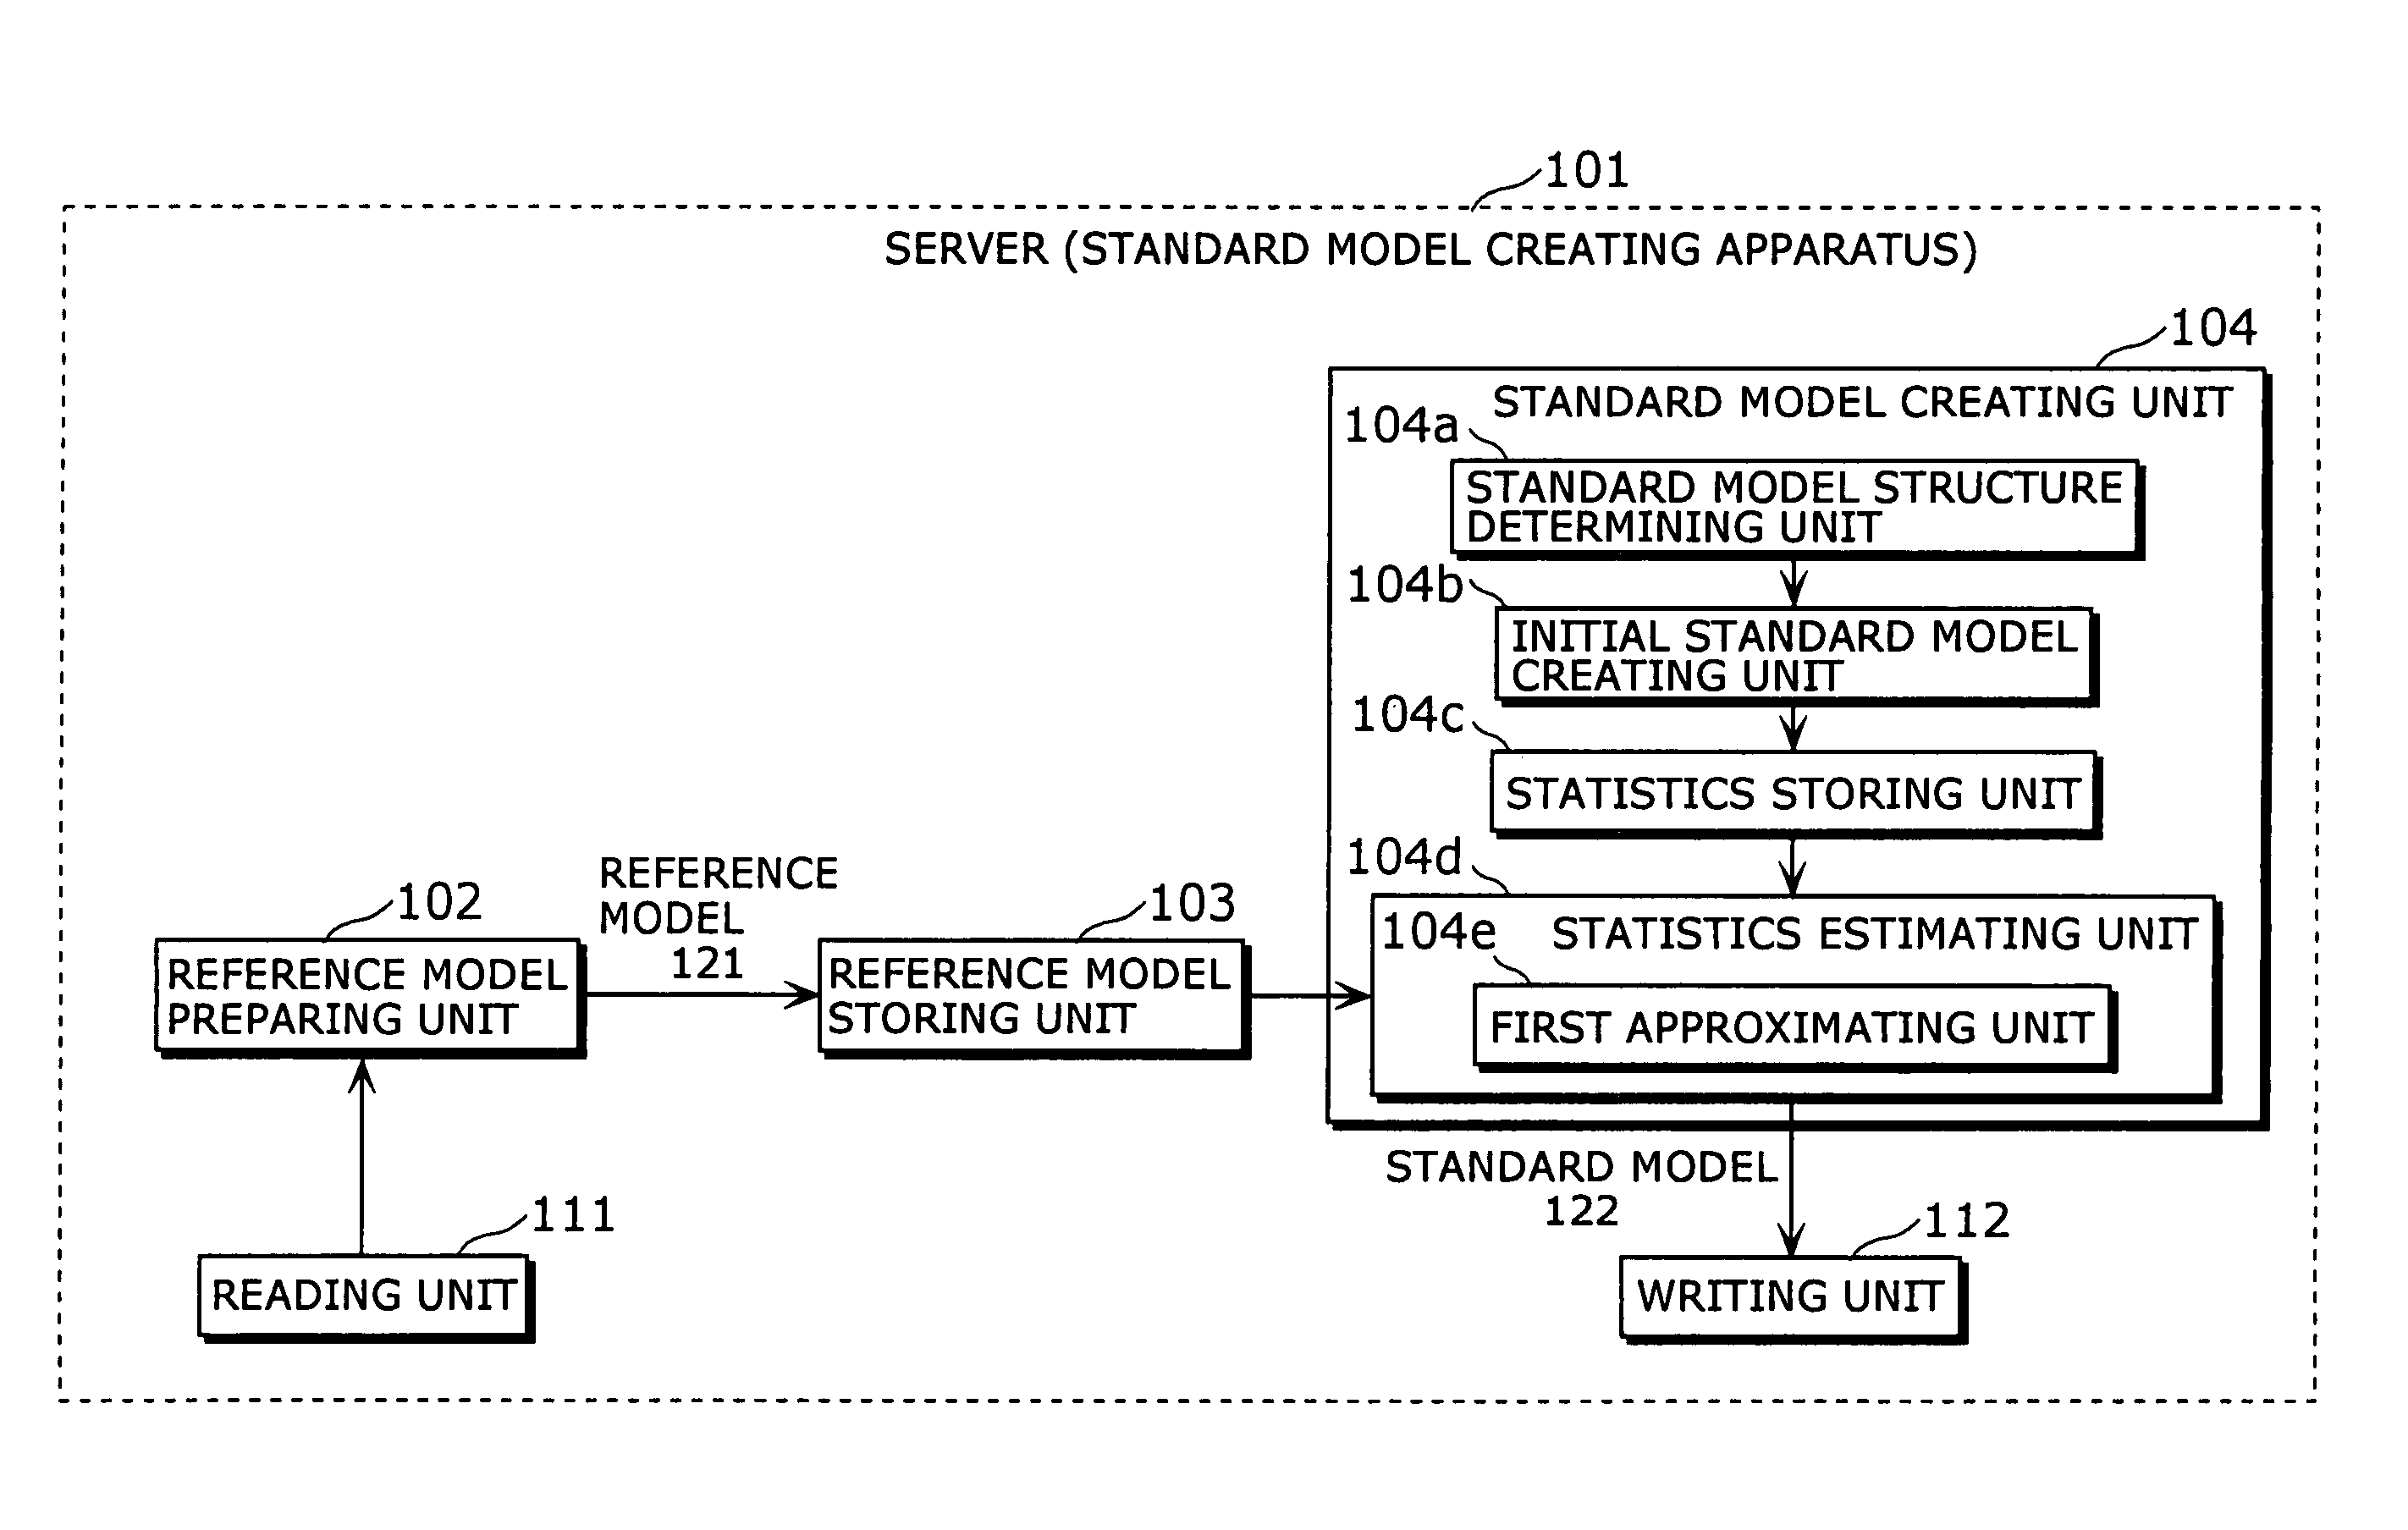 Standard-model generation for speech recognition using a reference model